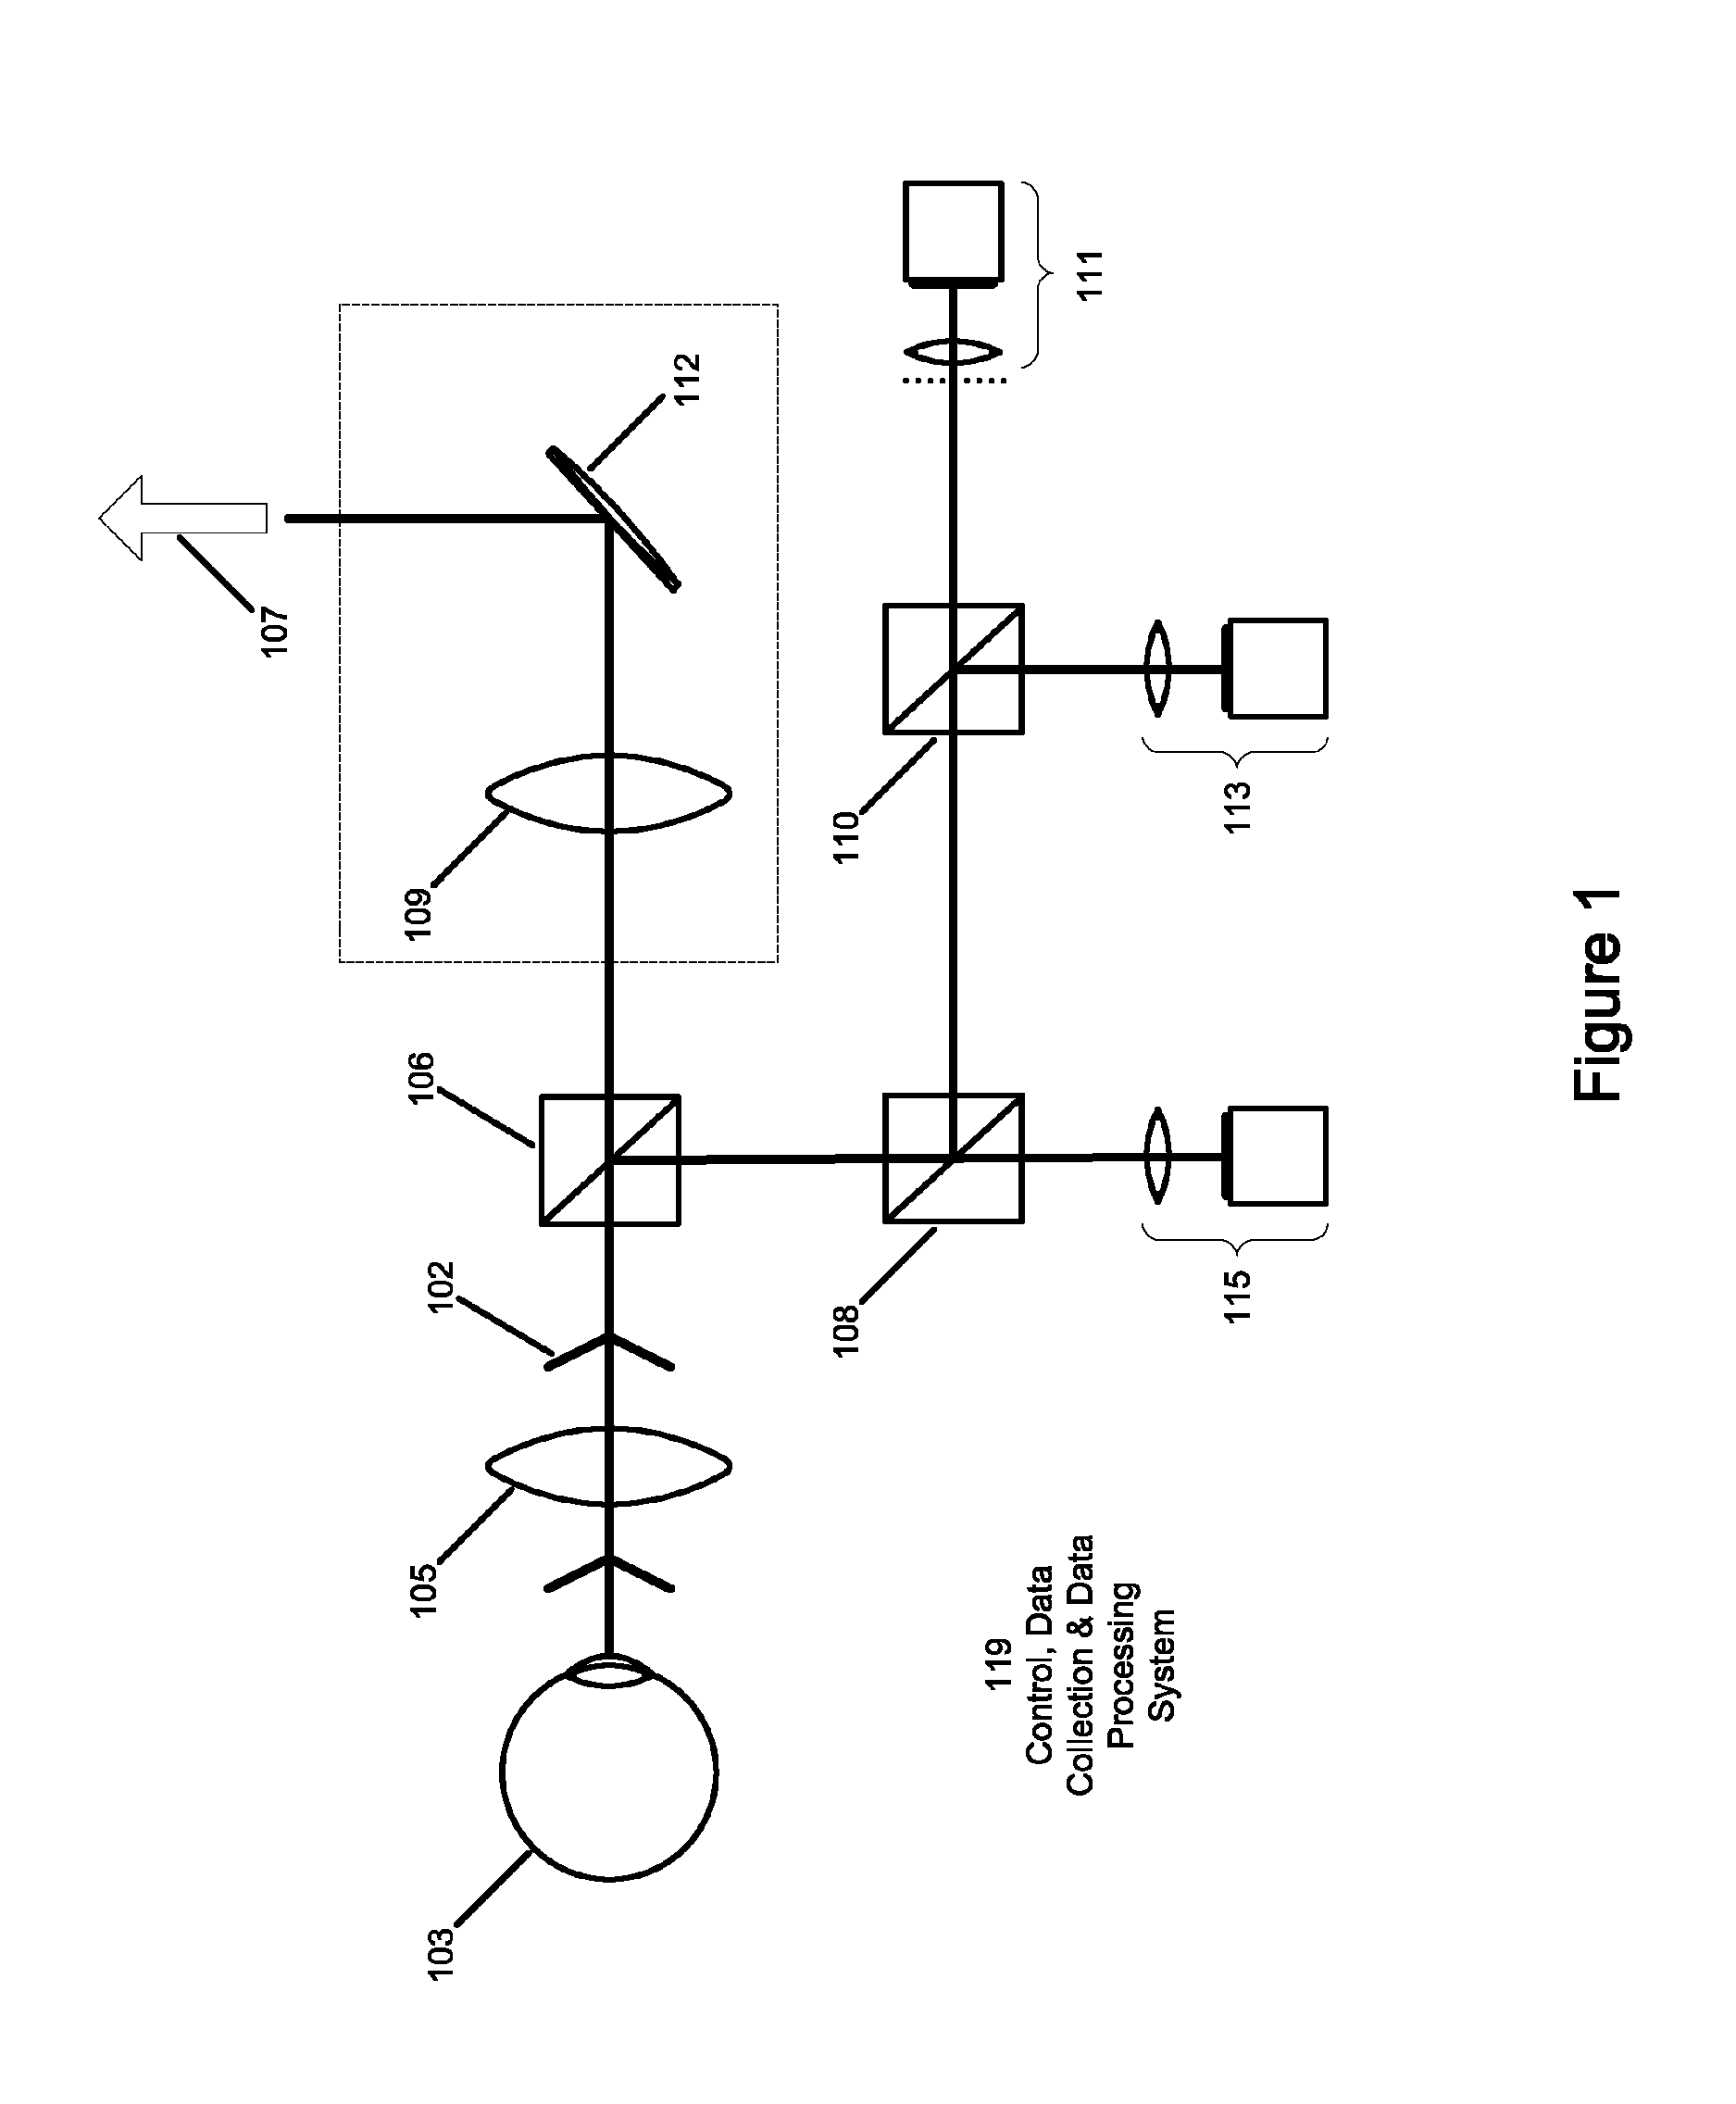 Objective traumatic brain injury assessment system and method